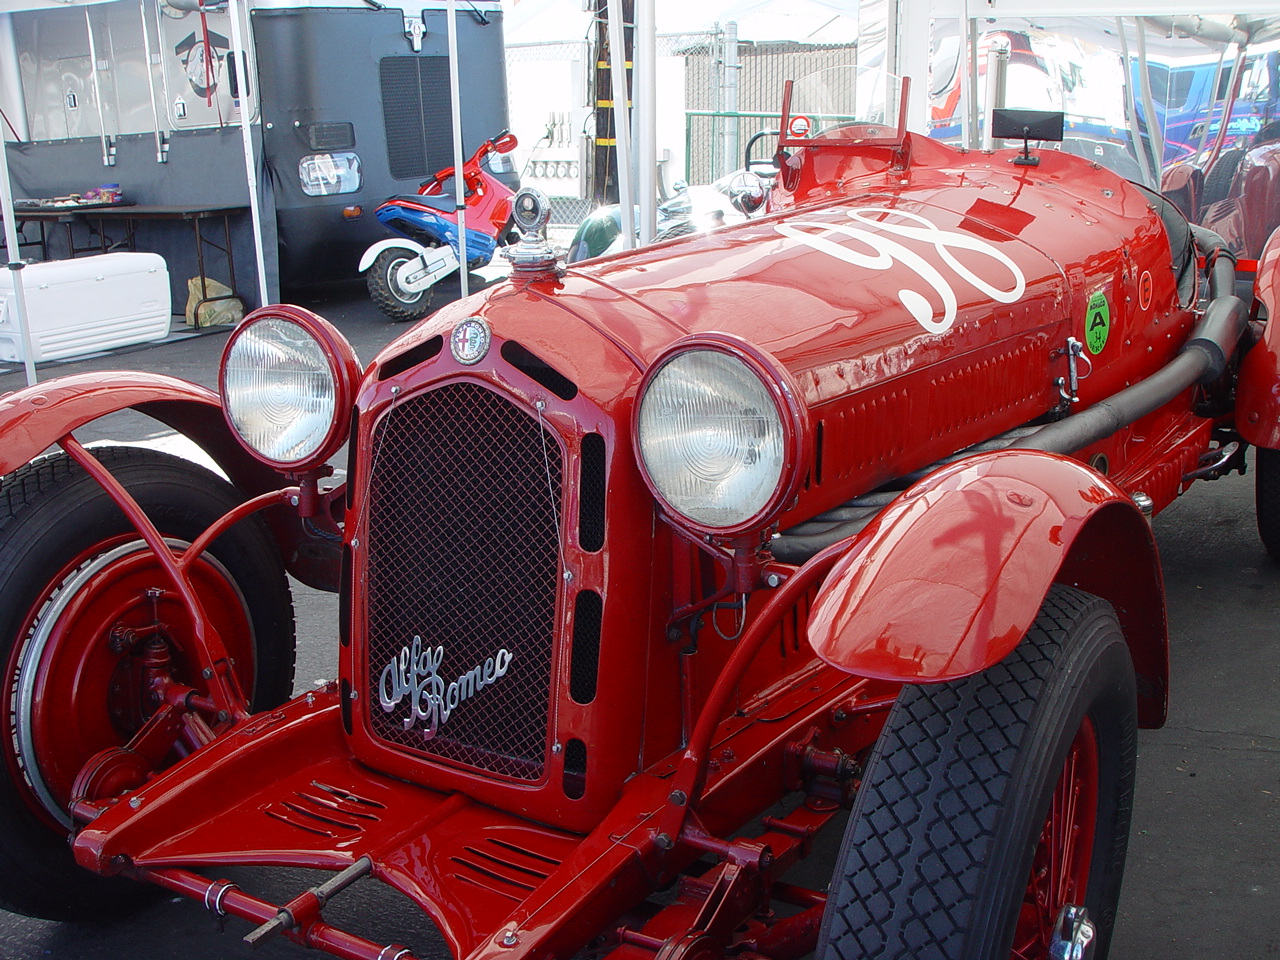 an old red firetruck is on display near other vehicles